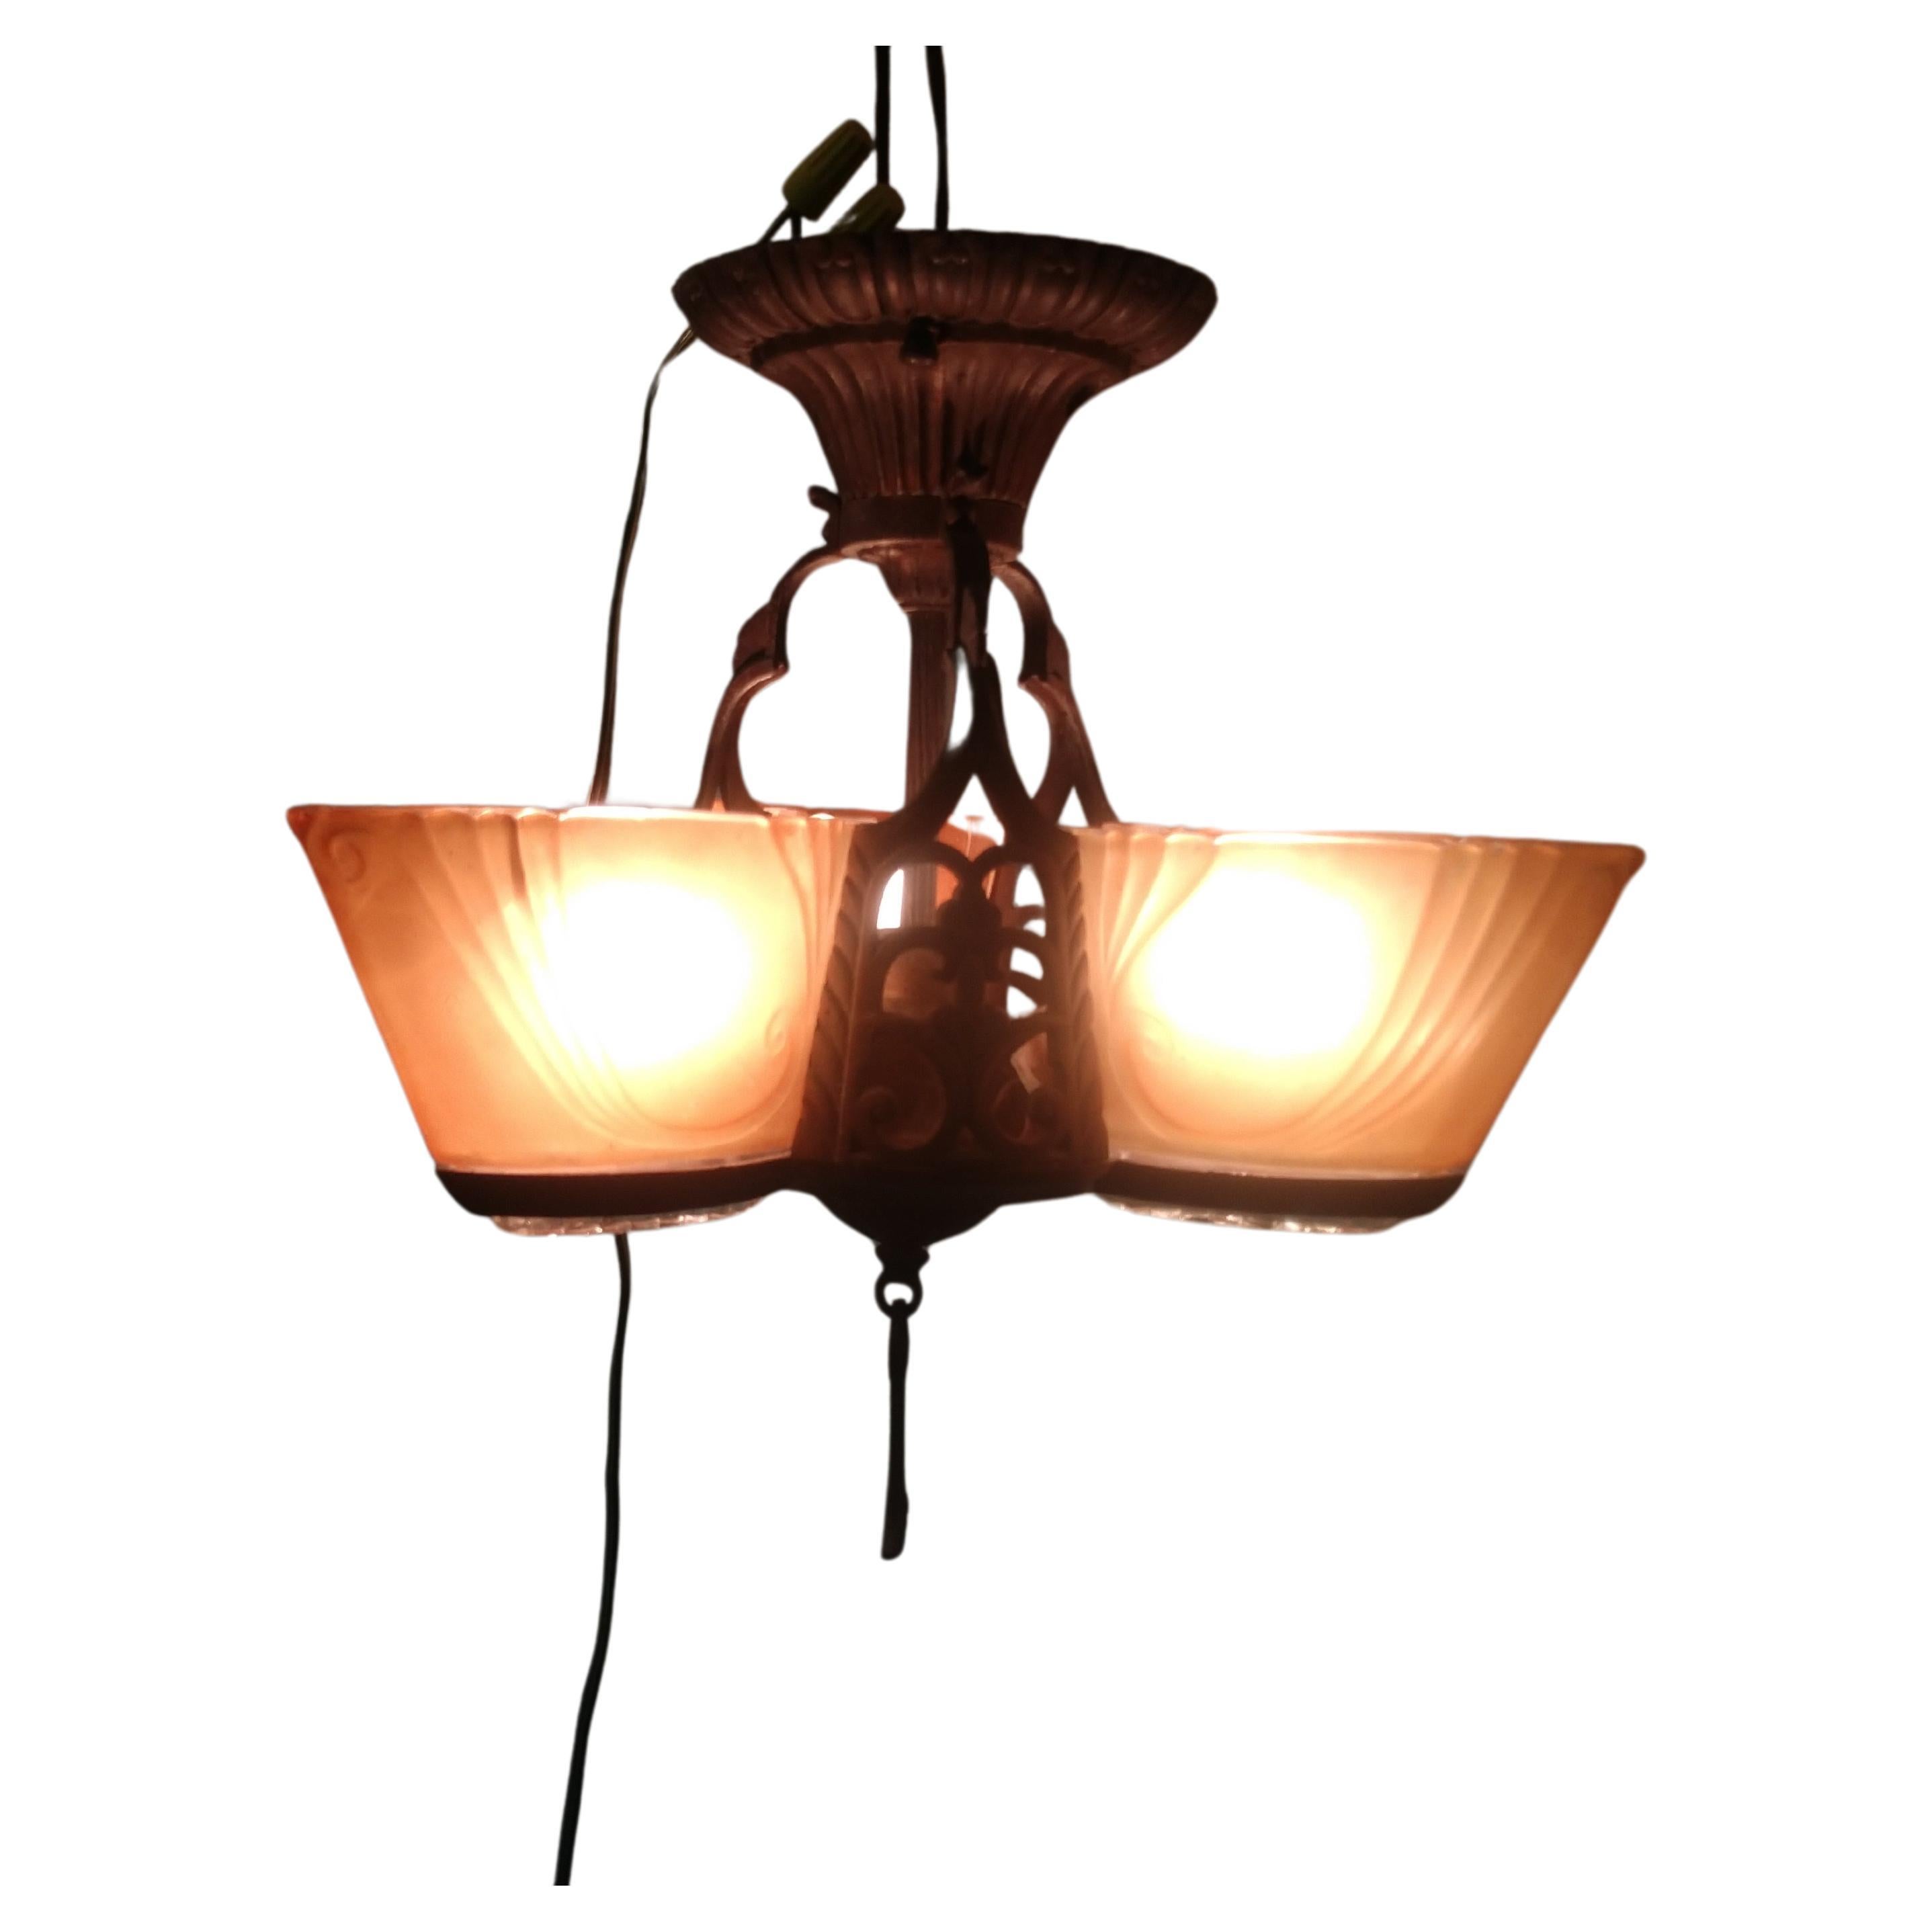 Art Deco Three-Light Slip Shade Chandelier, circa 1928 In Good Condition For Sale In Port Jervis, NY